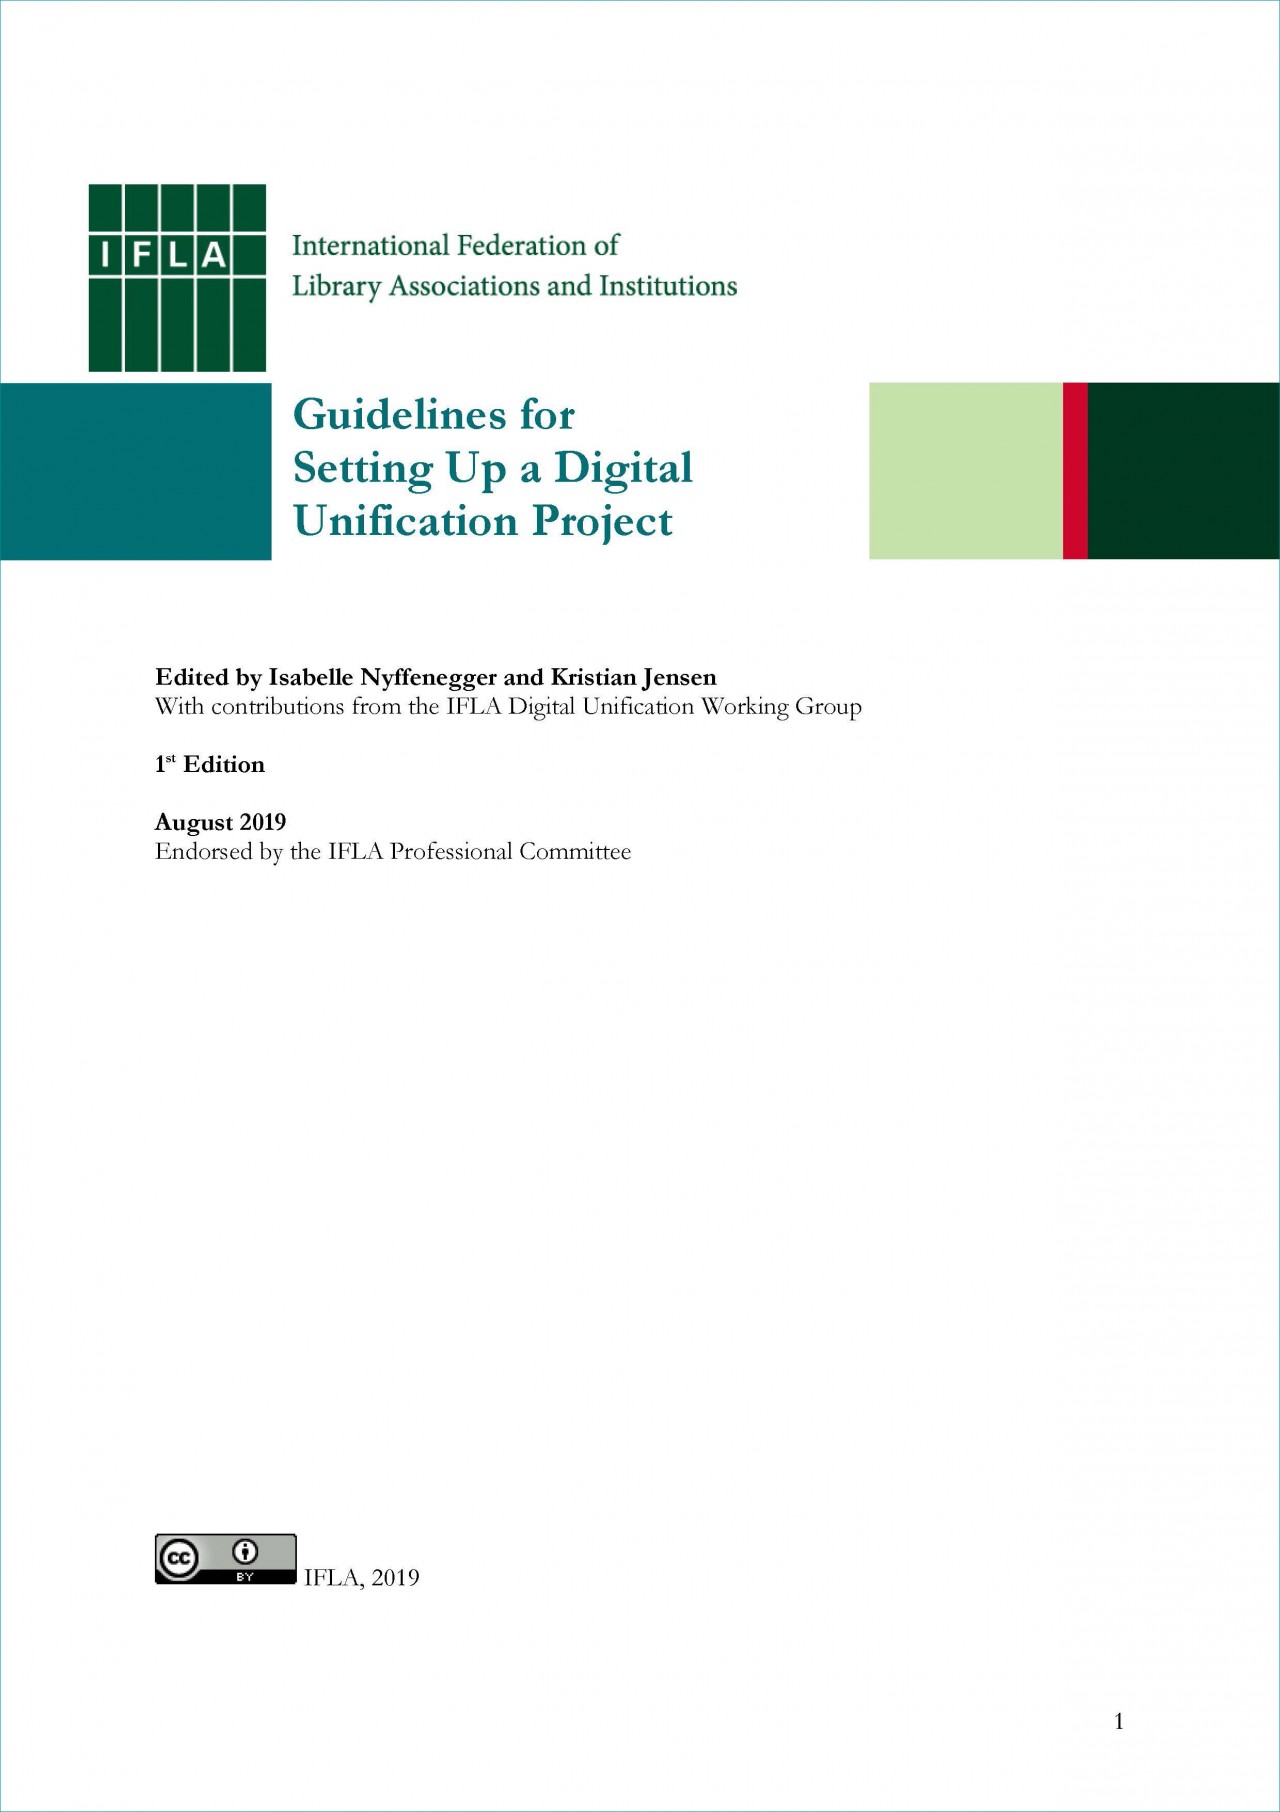 Guidelines for Setting Up a Digital Unification Project